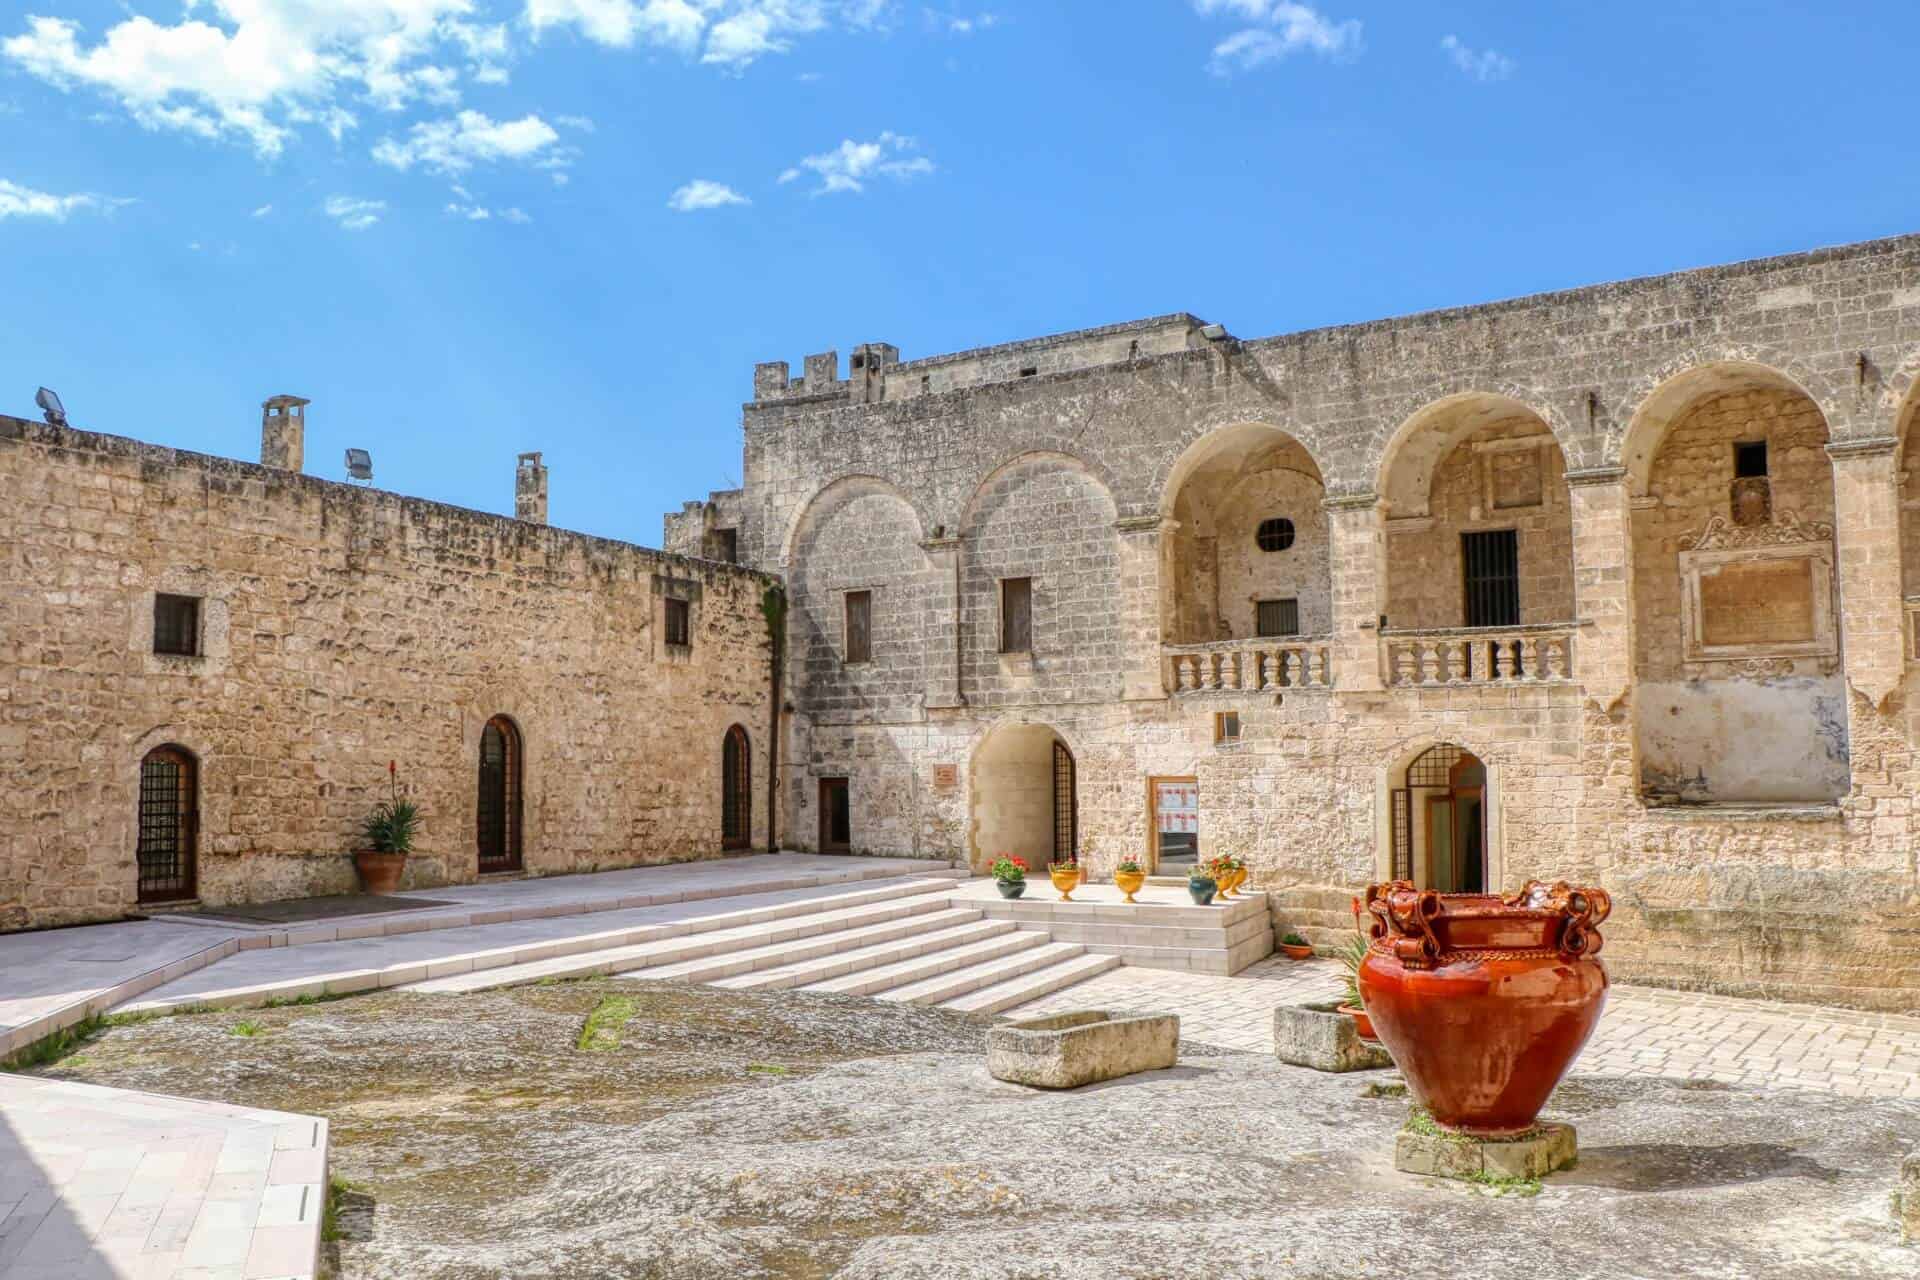 How to Decide Where to Stay In Puglia